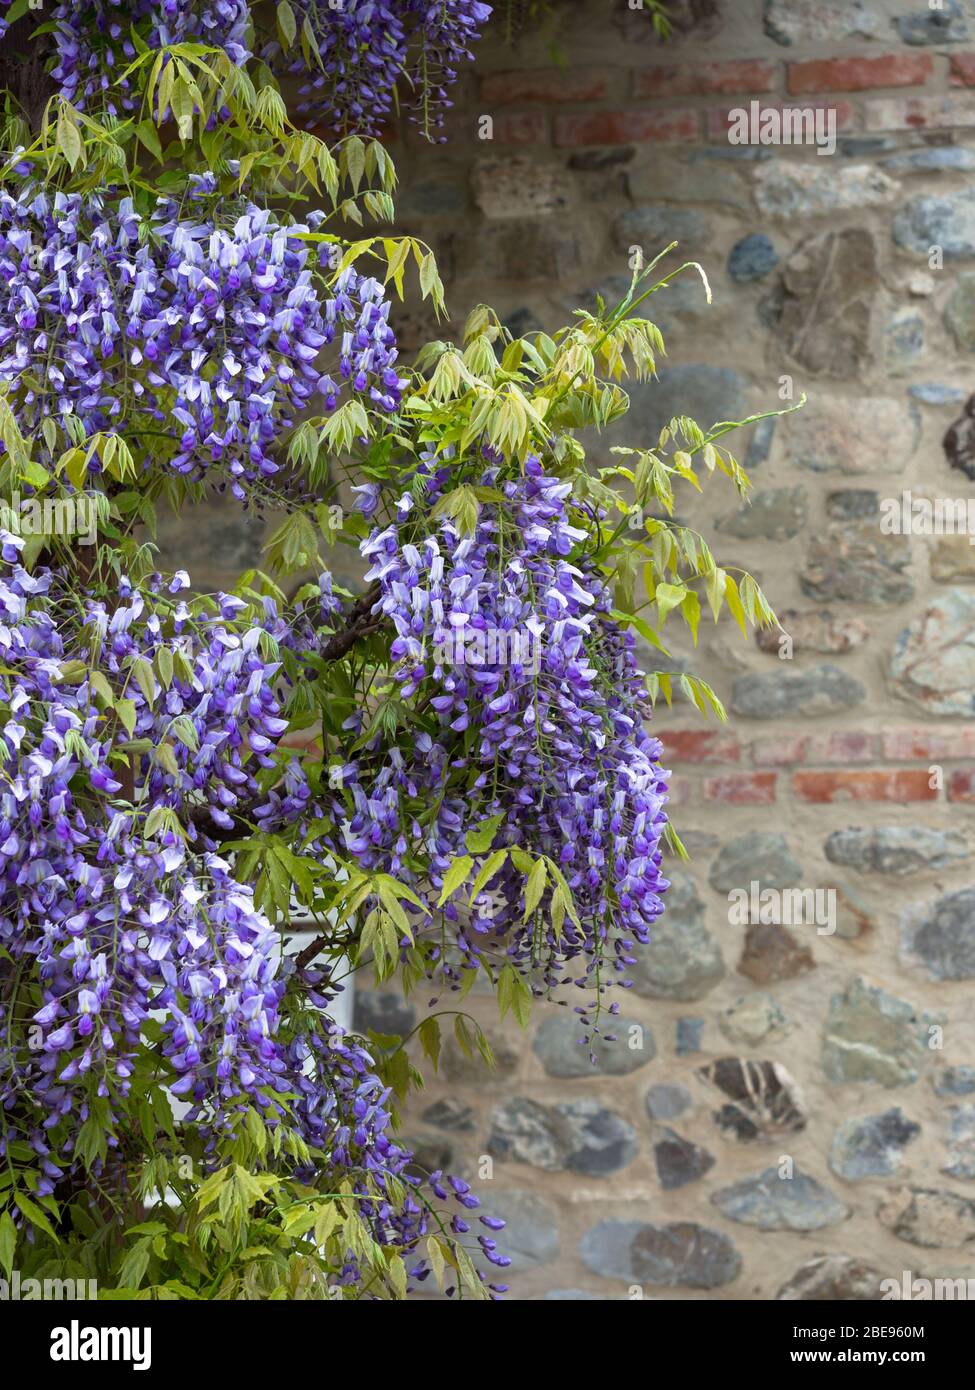 Violet wisteria flowers with stone wall in the background. Stock Photo